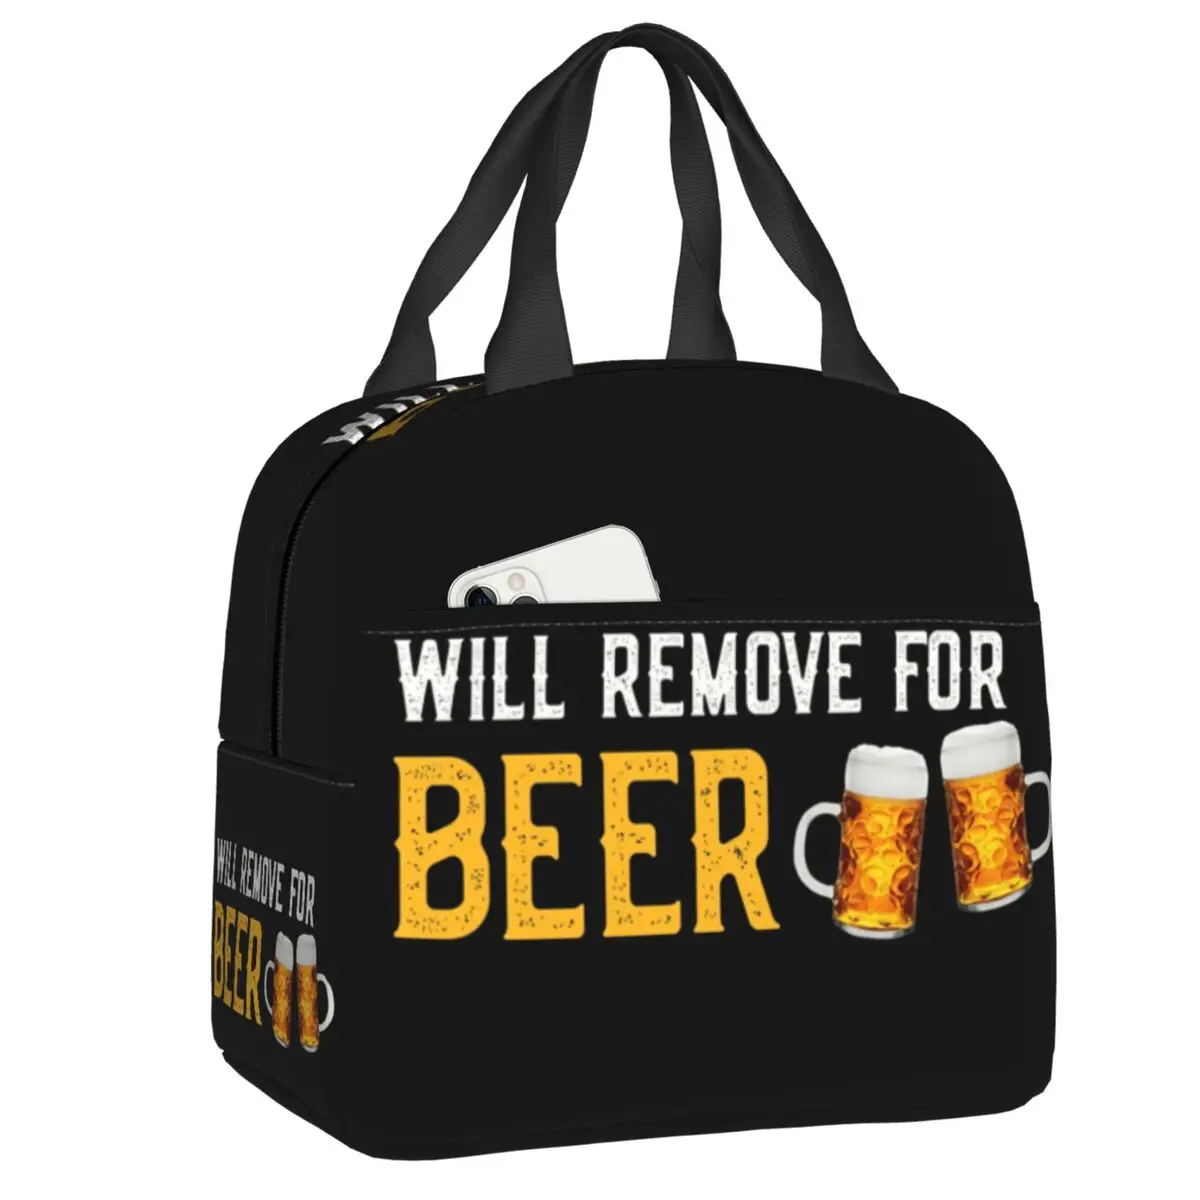 Will Remove For Beer Lunch Bag Women Warm Cooler Thermal Insulated Lunch Box for Student School Work Picnic Food Tote Bags